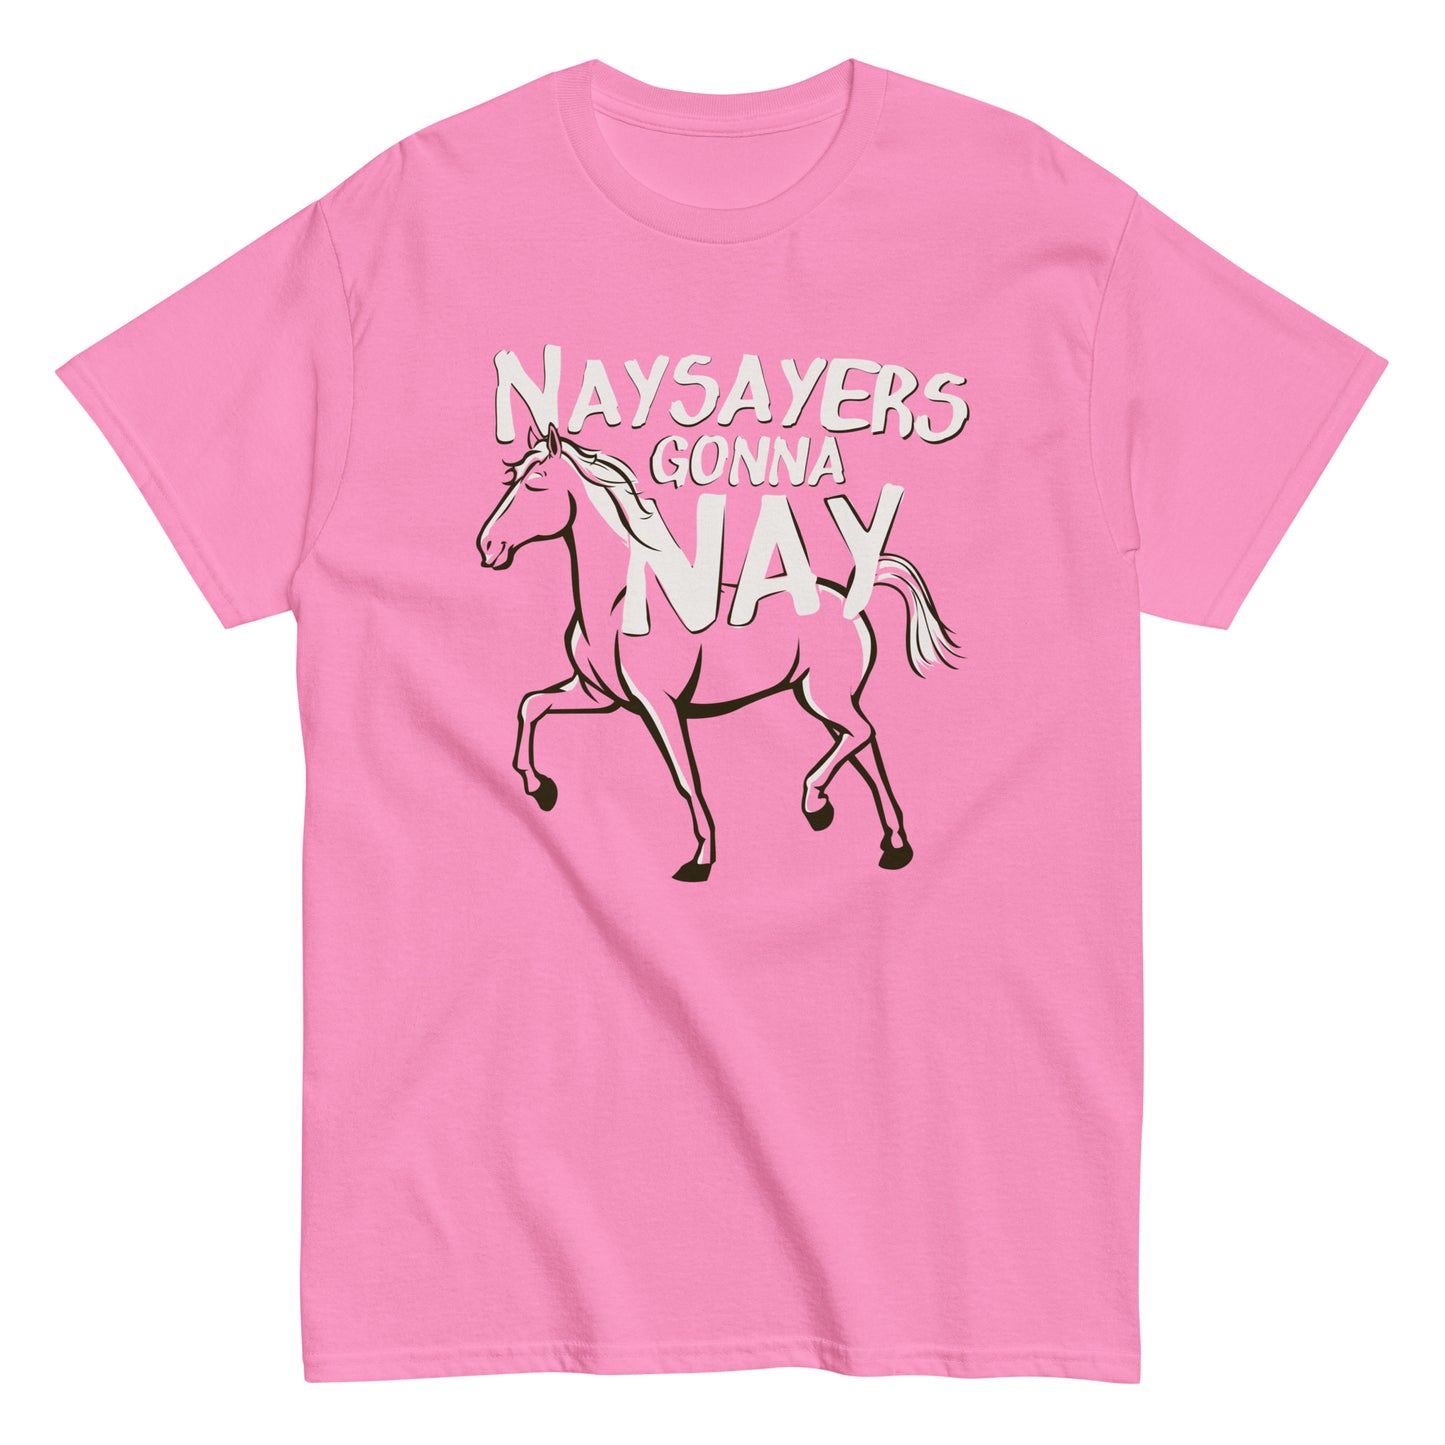 Nay Sayers Gonna Nay Men's Classic Tee